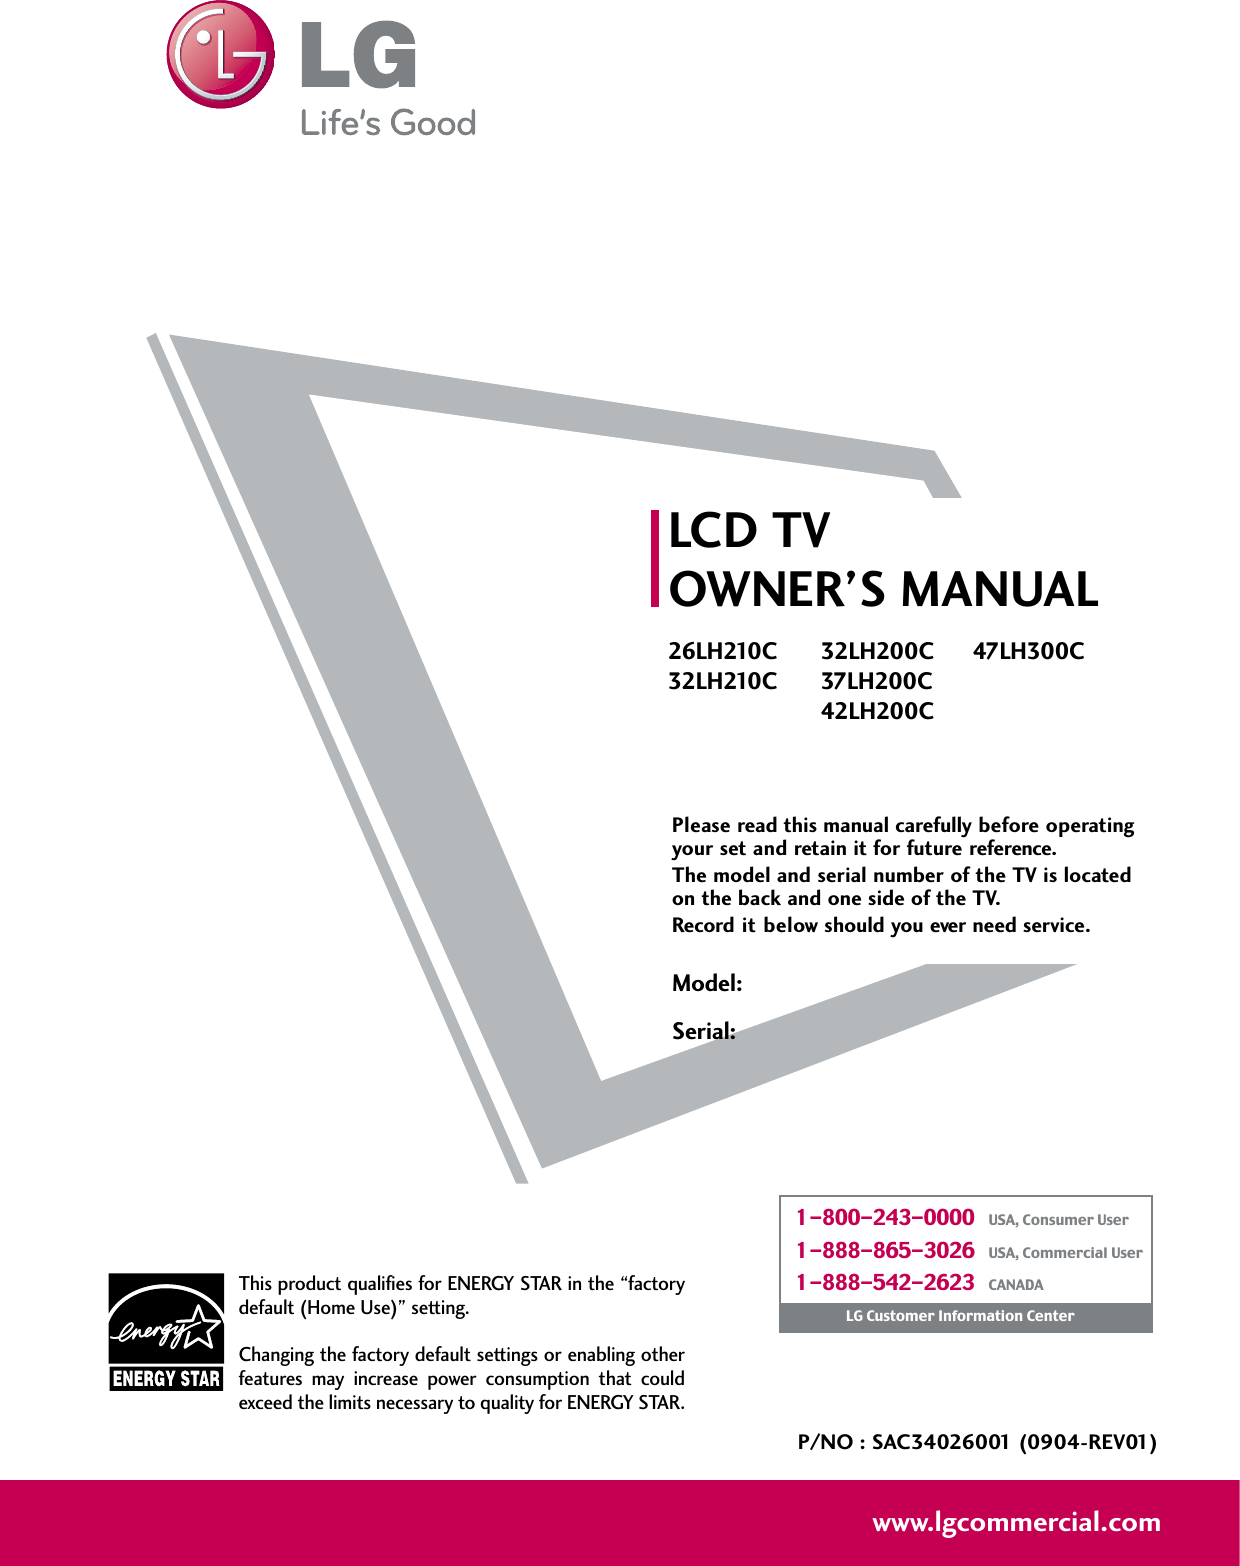 Please read this manual carefully before operatingyour set and retain it for future reference.The model and serial number of the TV is locatedon the back and one side of the TV. Record it below should you ever need service.Model:Serial:LCD TVOWNER’S MANUAL26LH210C32LH210C32LH200C37LH200C42LH200C47LH300CP/NO : SAC34026001 (0904-REV01)www.lgcommercial.comThis product qualifies for ENERGY STAR in the “factorydefault (Home Use)” setting.Changing the factory default settings or enabling otherfeatures  may  increase  power  consumption  that  couldexceed the limits necessary to quality for ENERGY STAR.1-800-243-0000   USA, Consumer User1-888-865-3026   USA, Commercial User1-888-542-2623   CANADALG Customer Information Center